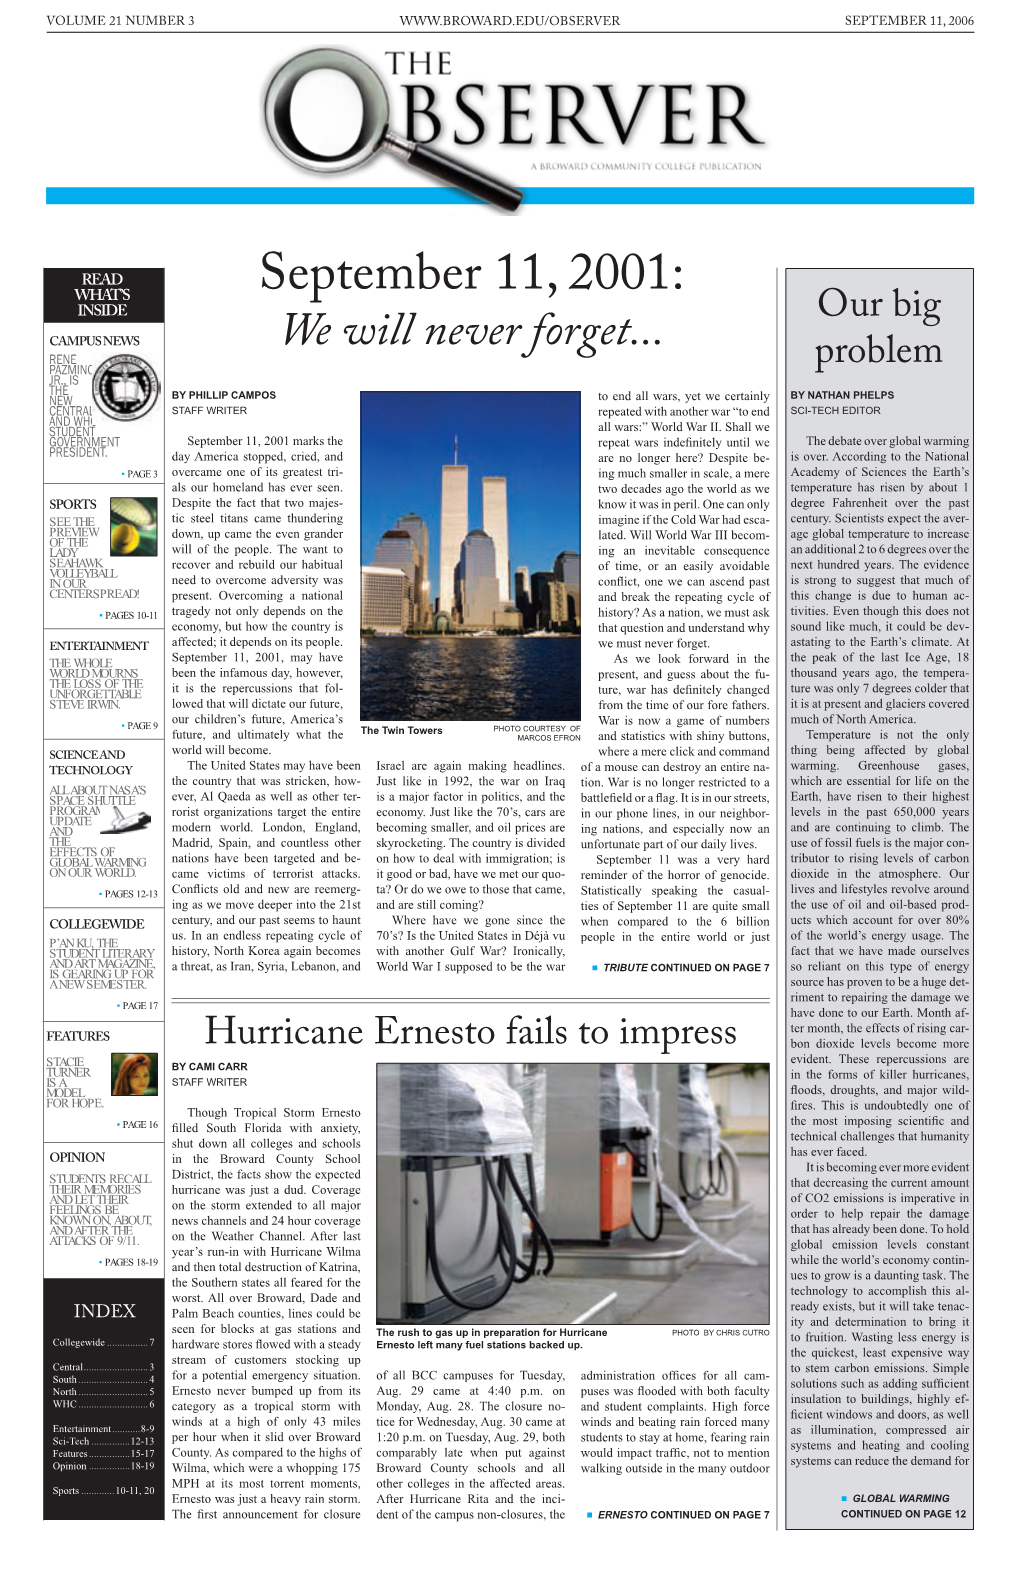 September 11, 2001: Inside Our Big Campus News Rene Pazmino, We Will Never Forget